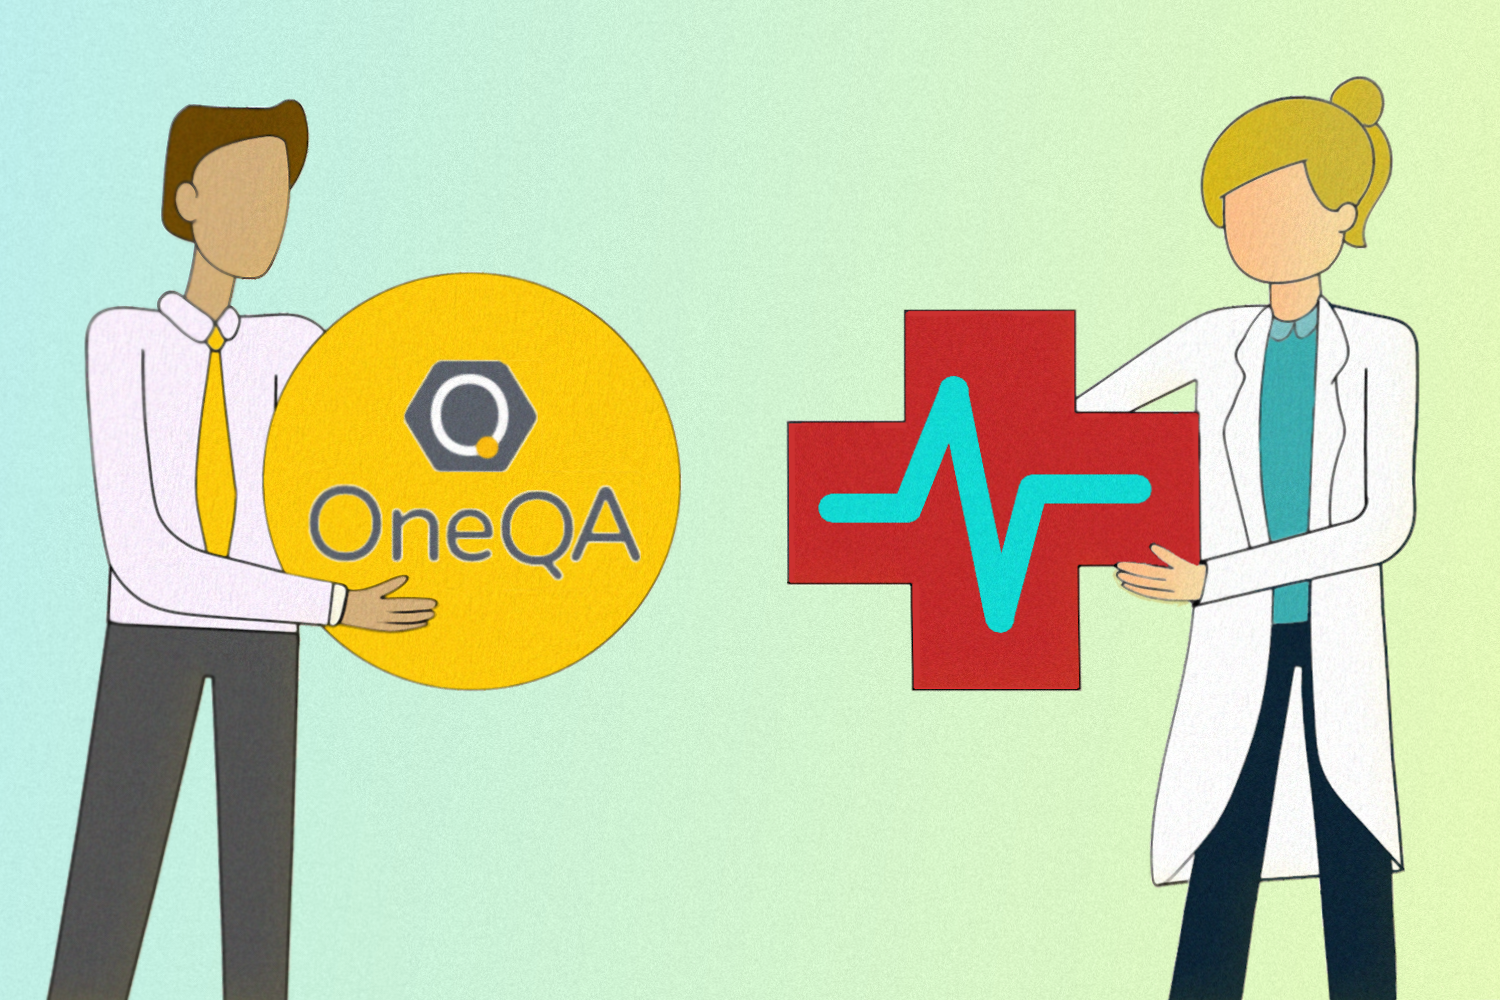 Animated doctor with OneQA and medical logo